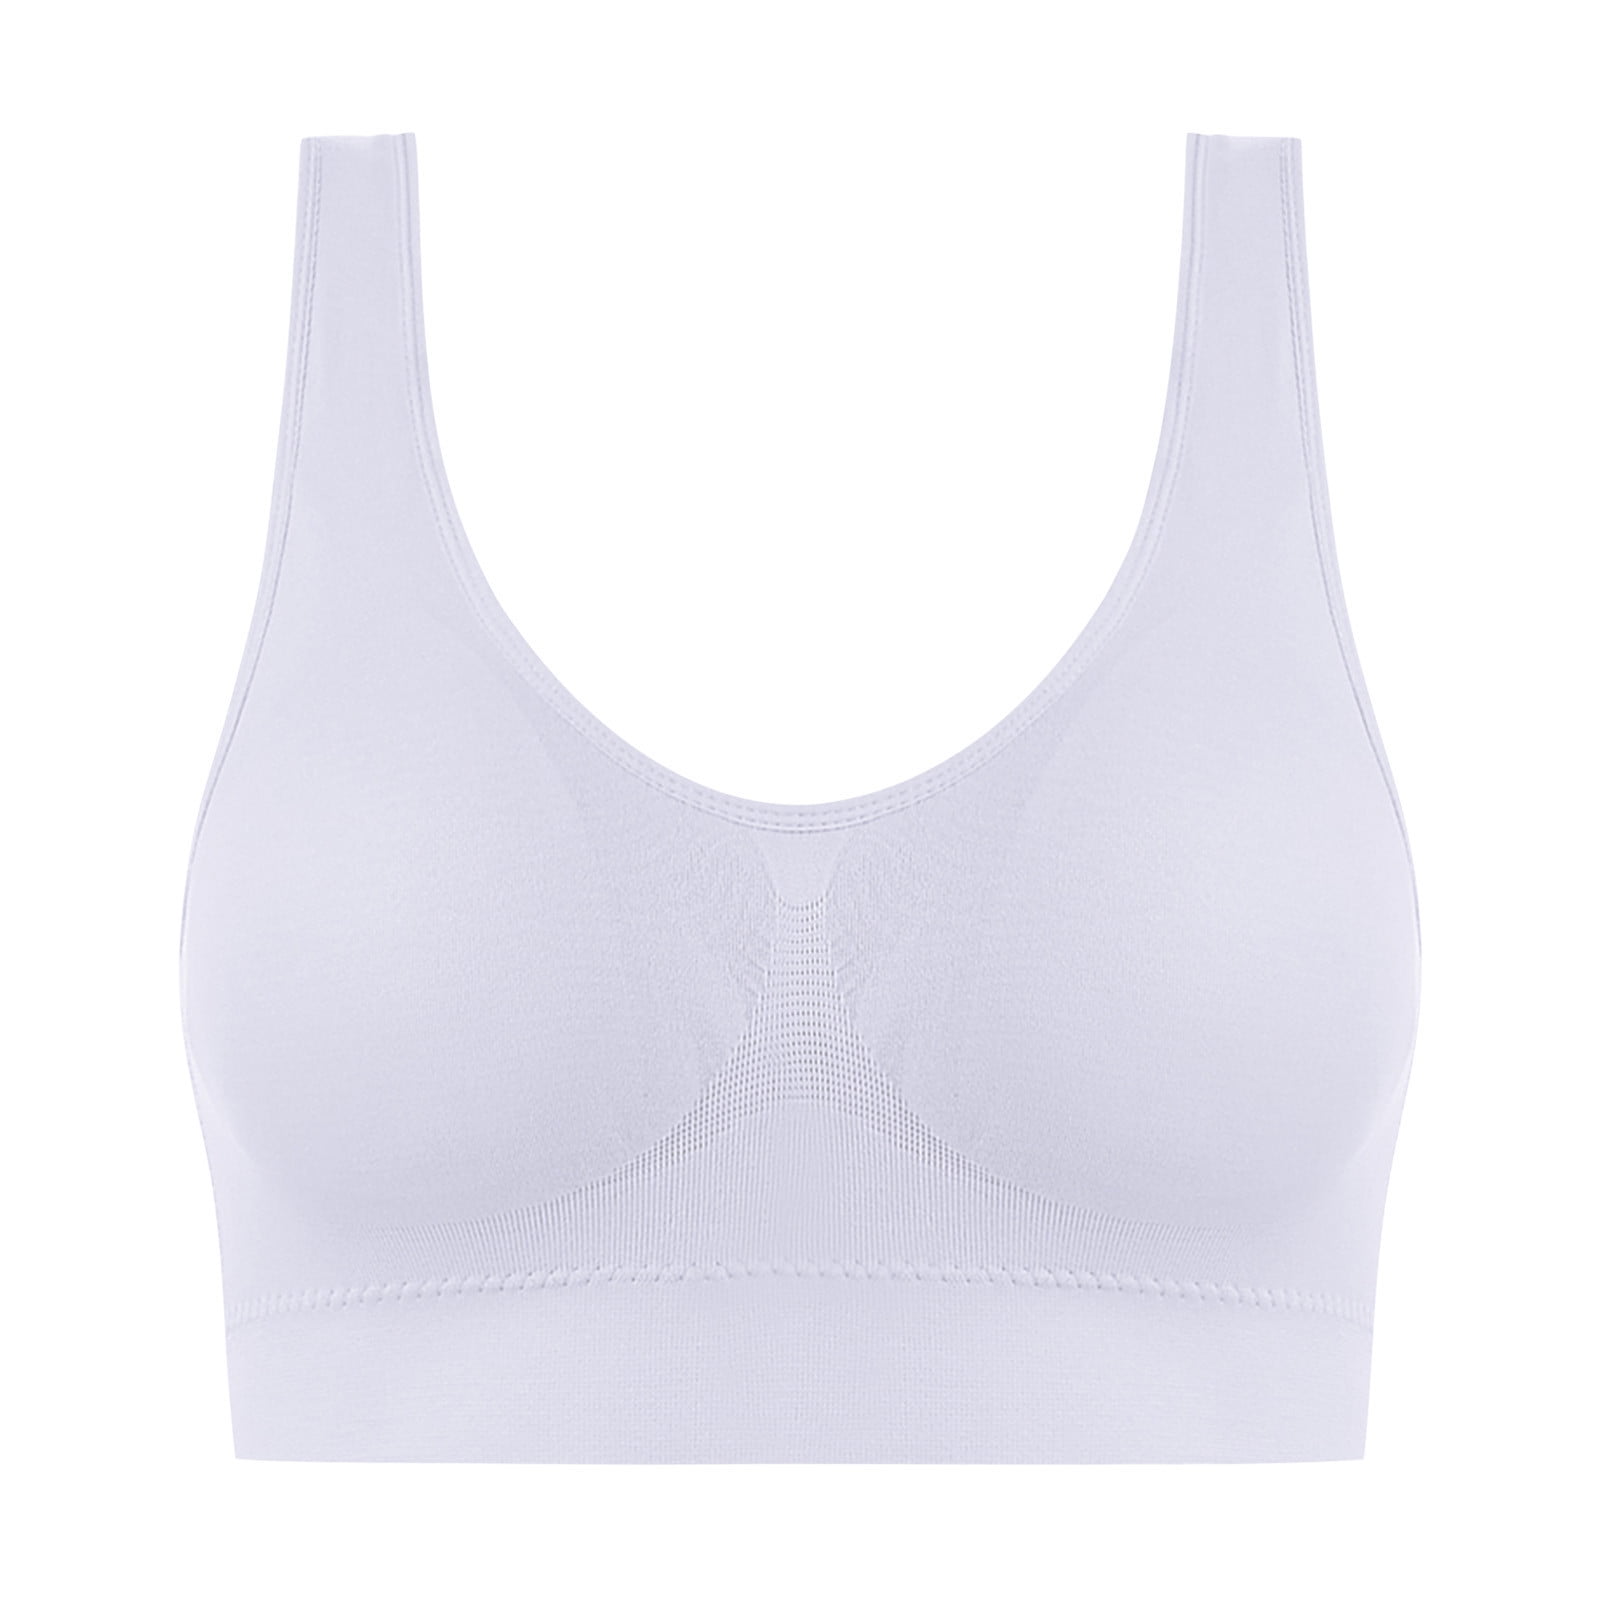 Xihbxyly Workout Bras for Women Woman Sexy Ladies Bra without